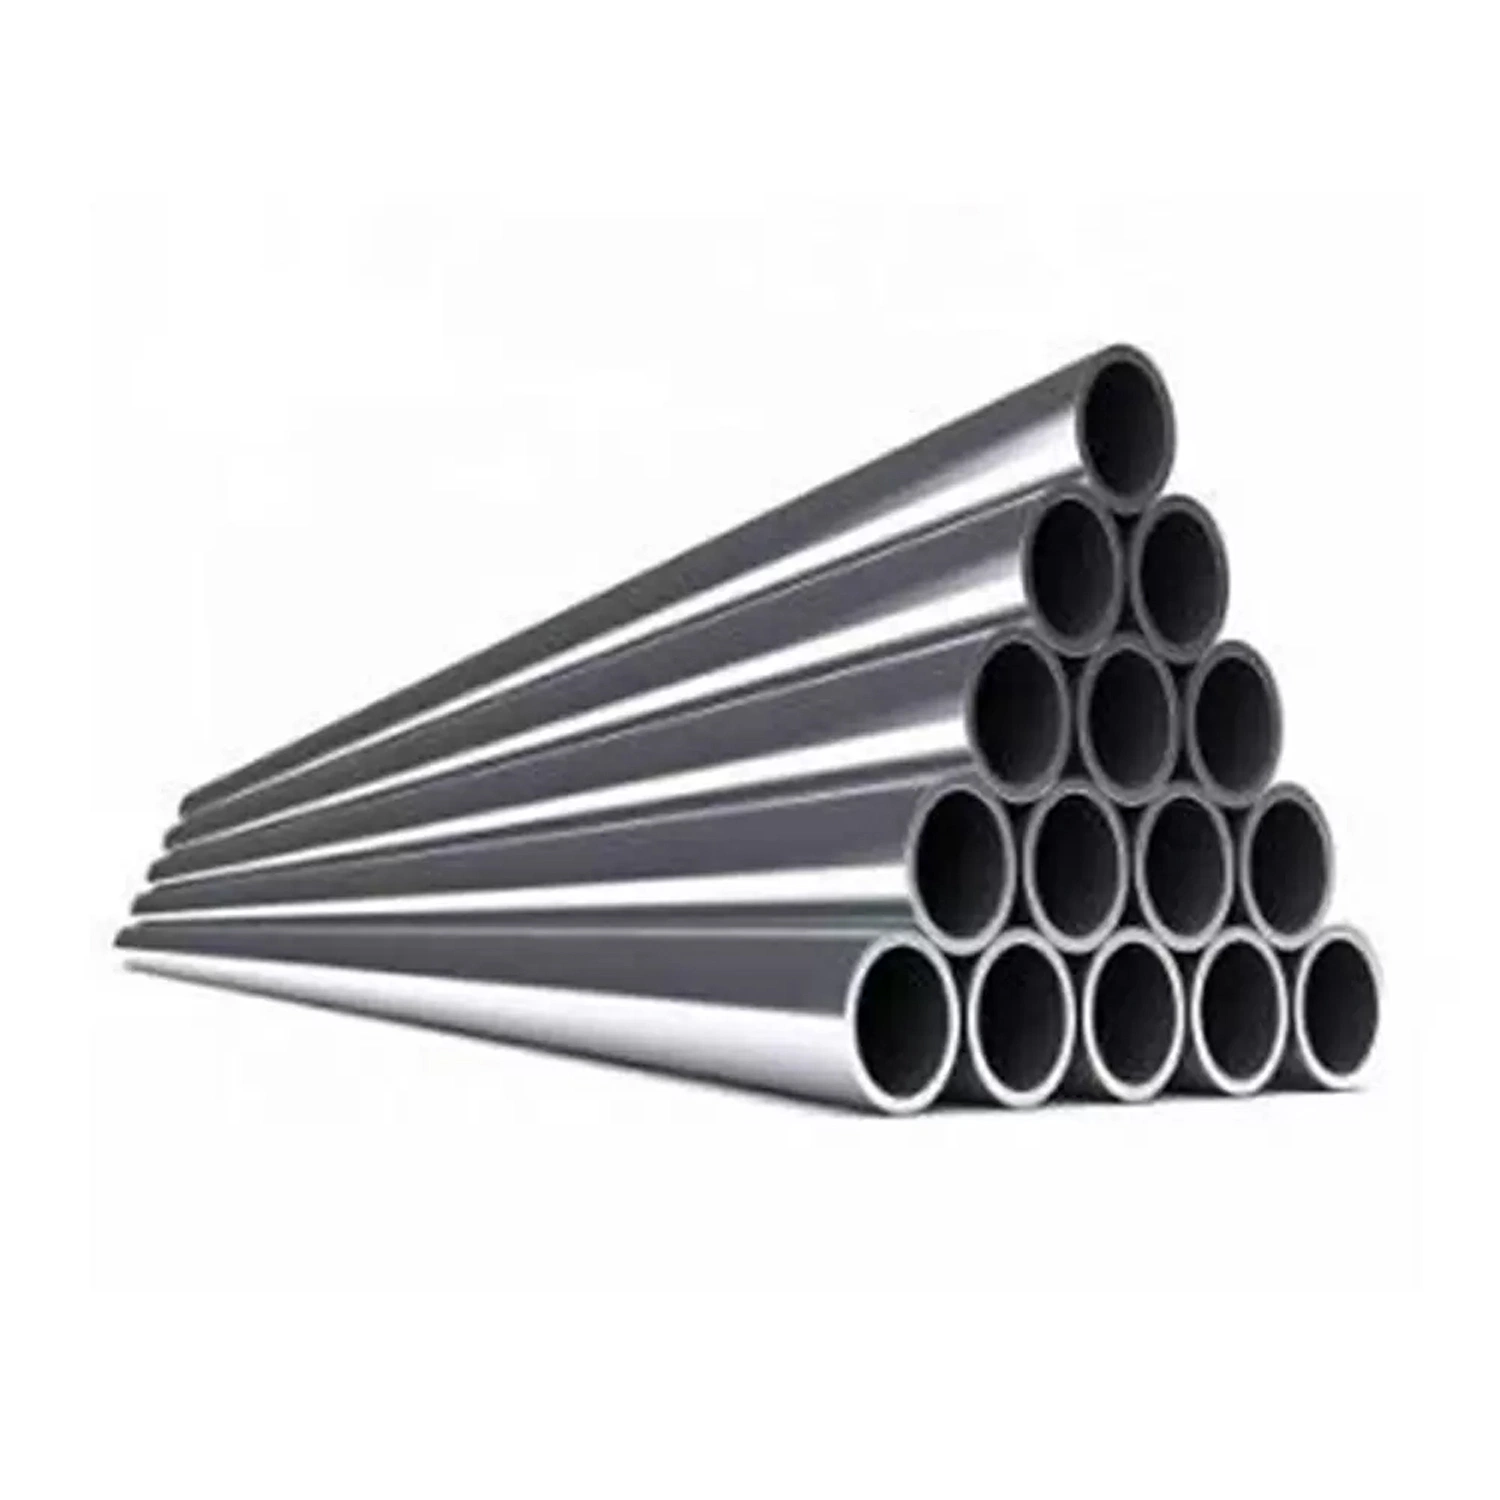 ASTM AISI 201 304 316 316L 430 Pickling Ba 2b Bright Polish Cold Hot Rolled Stainless Steel Seamless / Welded Pipe Tube for Building Materials